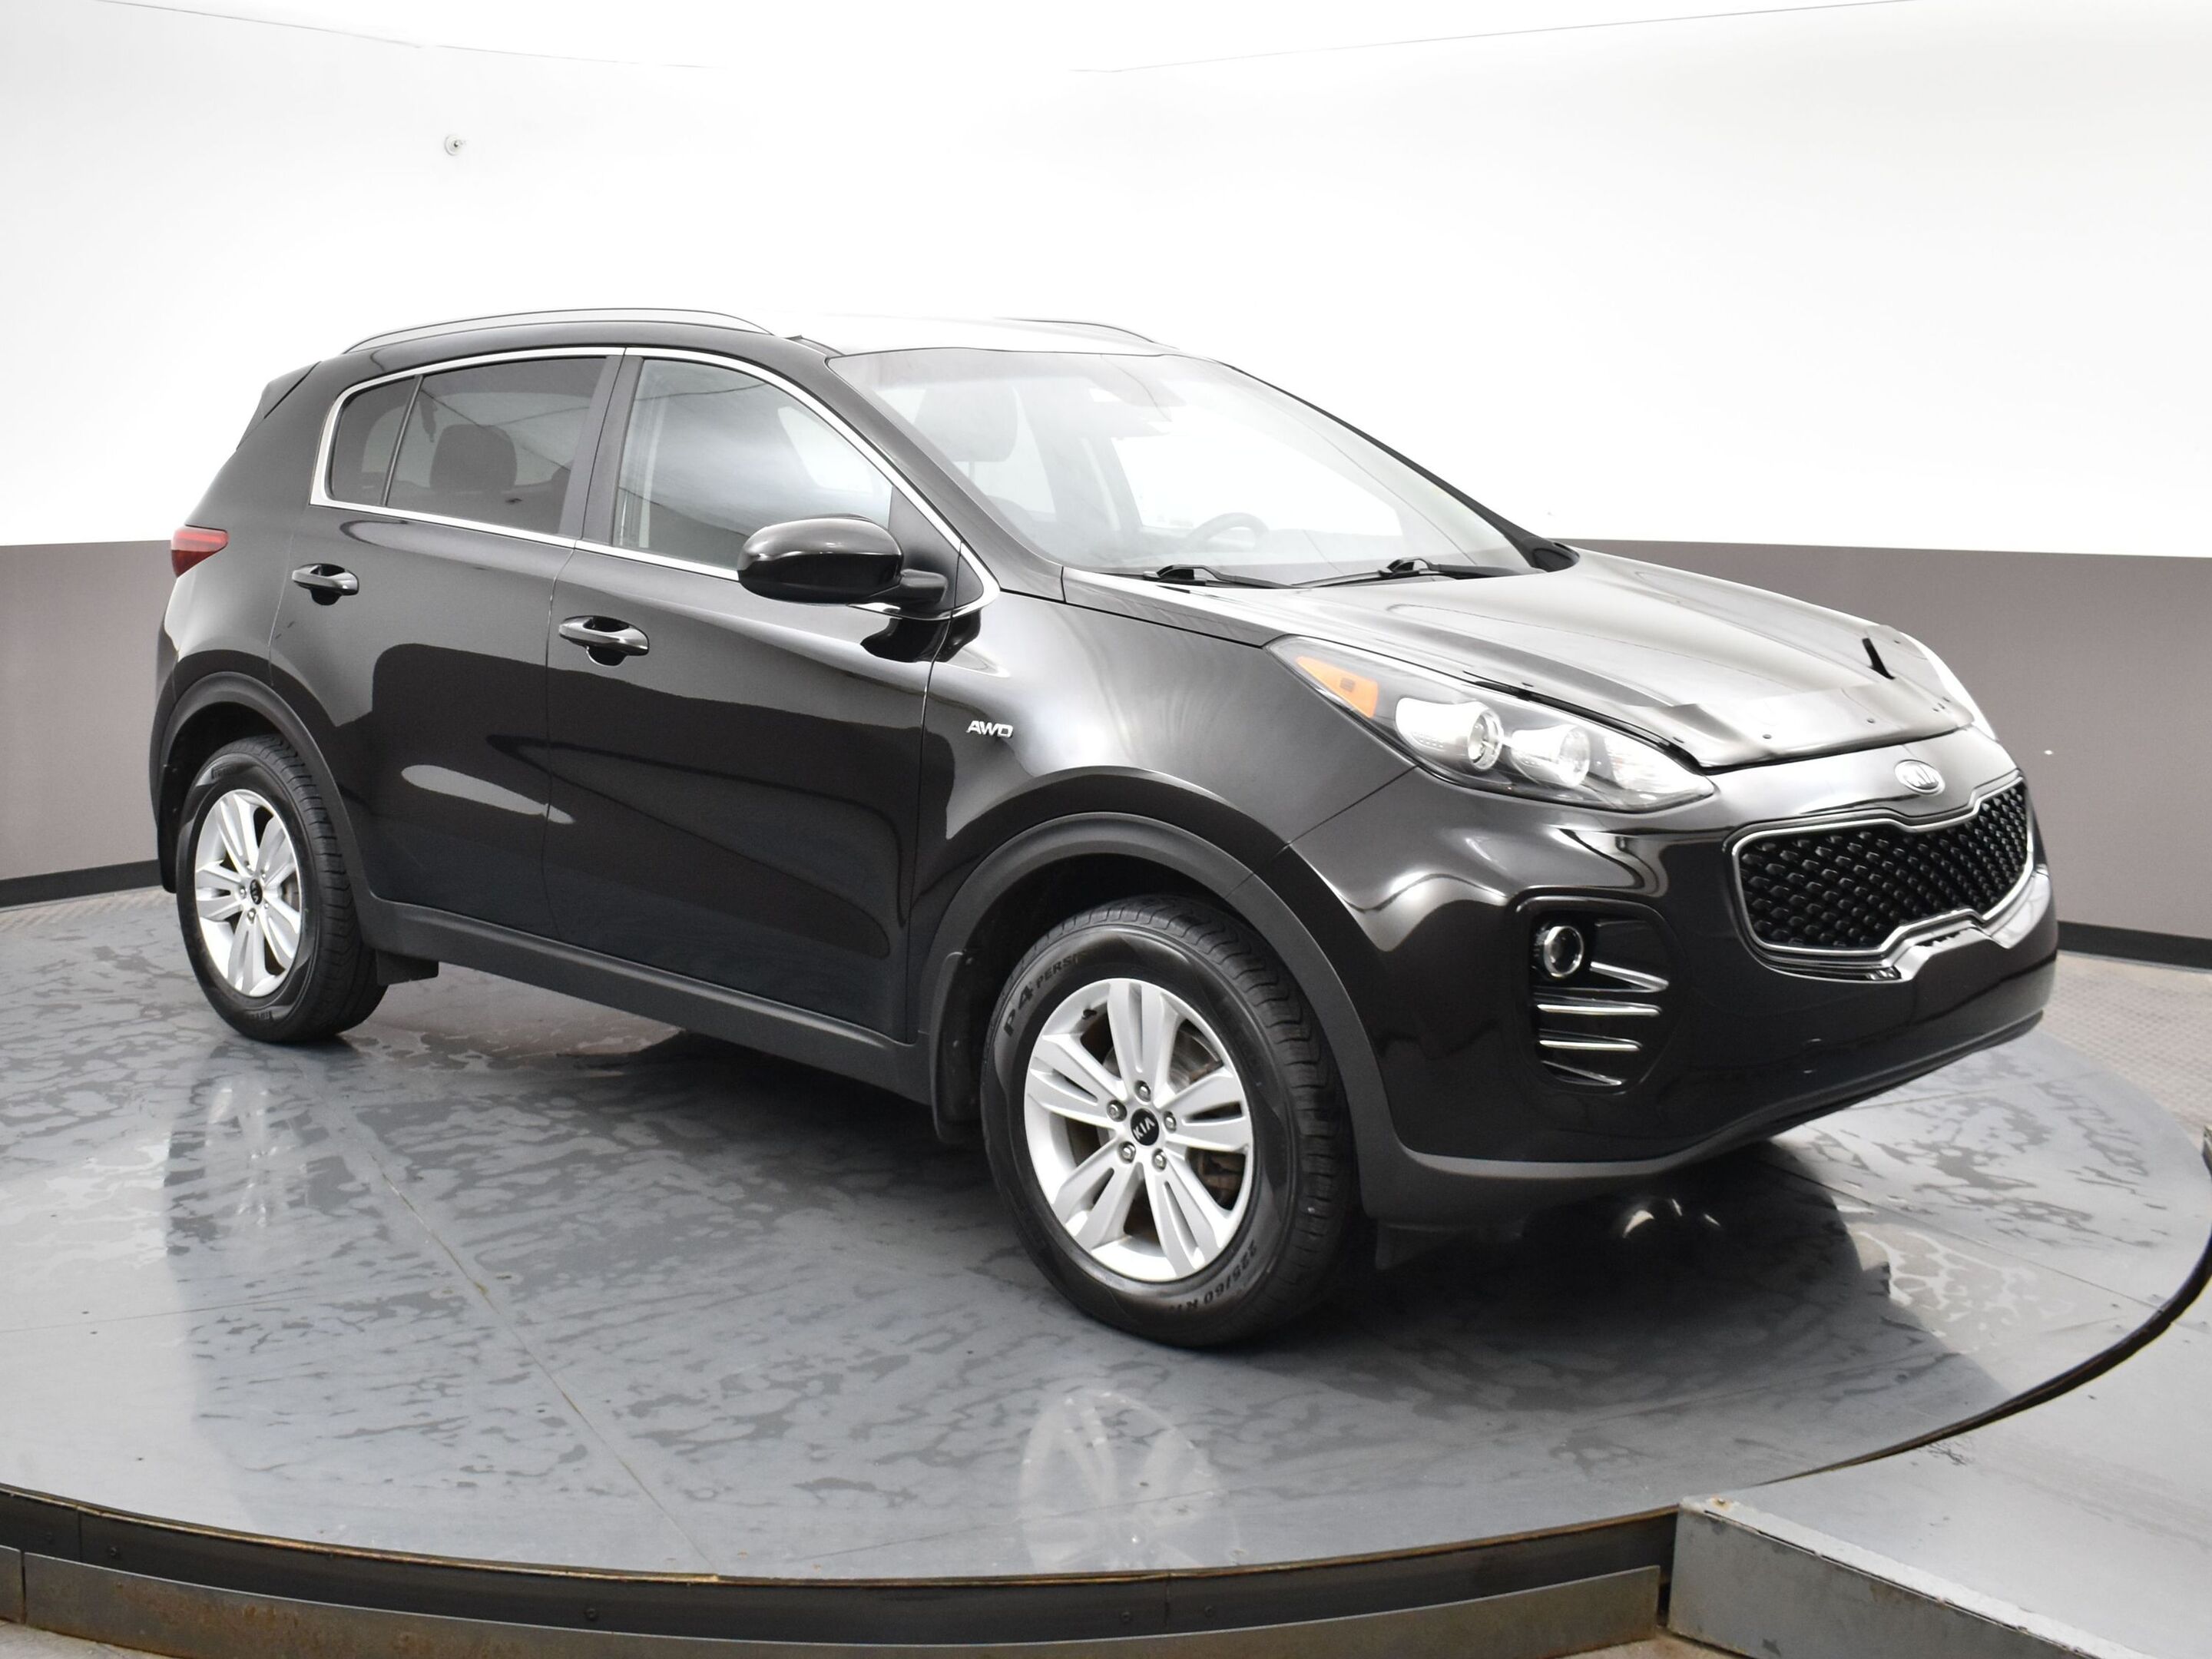 2019 Kia Sportage LX AWD Certified Rates Starting at 4.99%, Ask abou